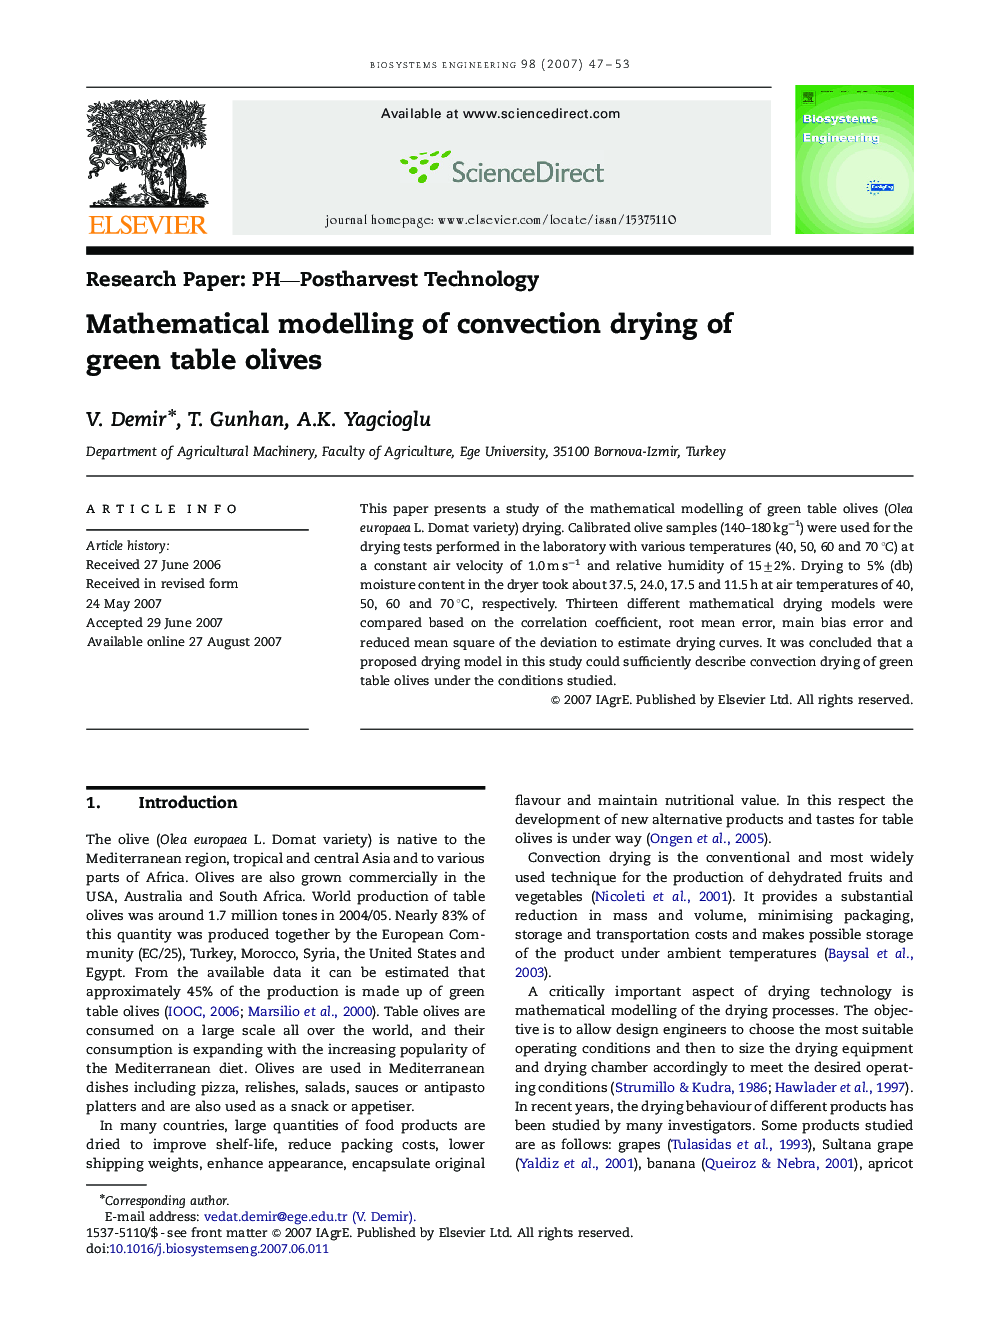 Mathematical modelling of convection drying of green table olives